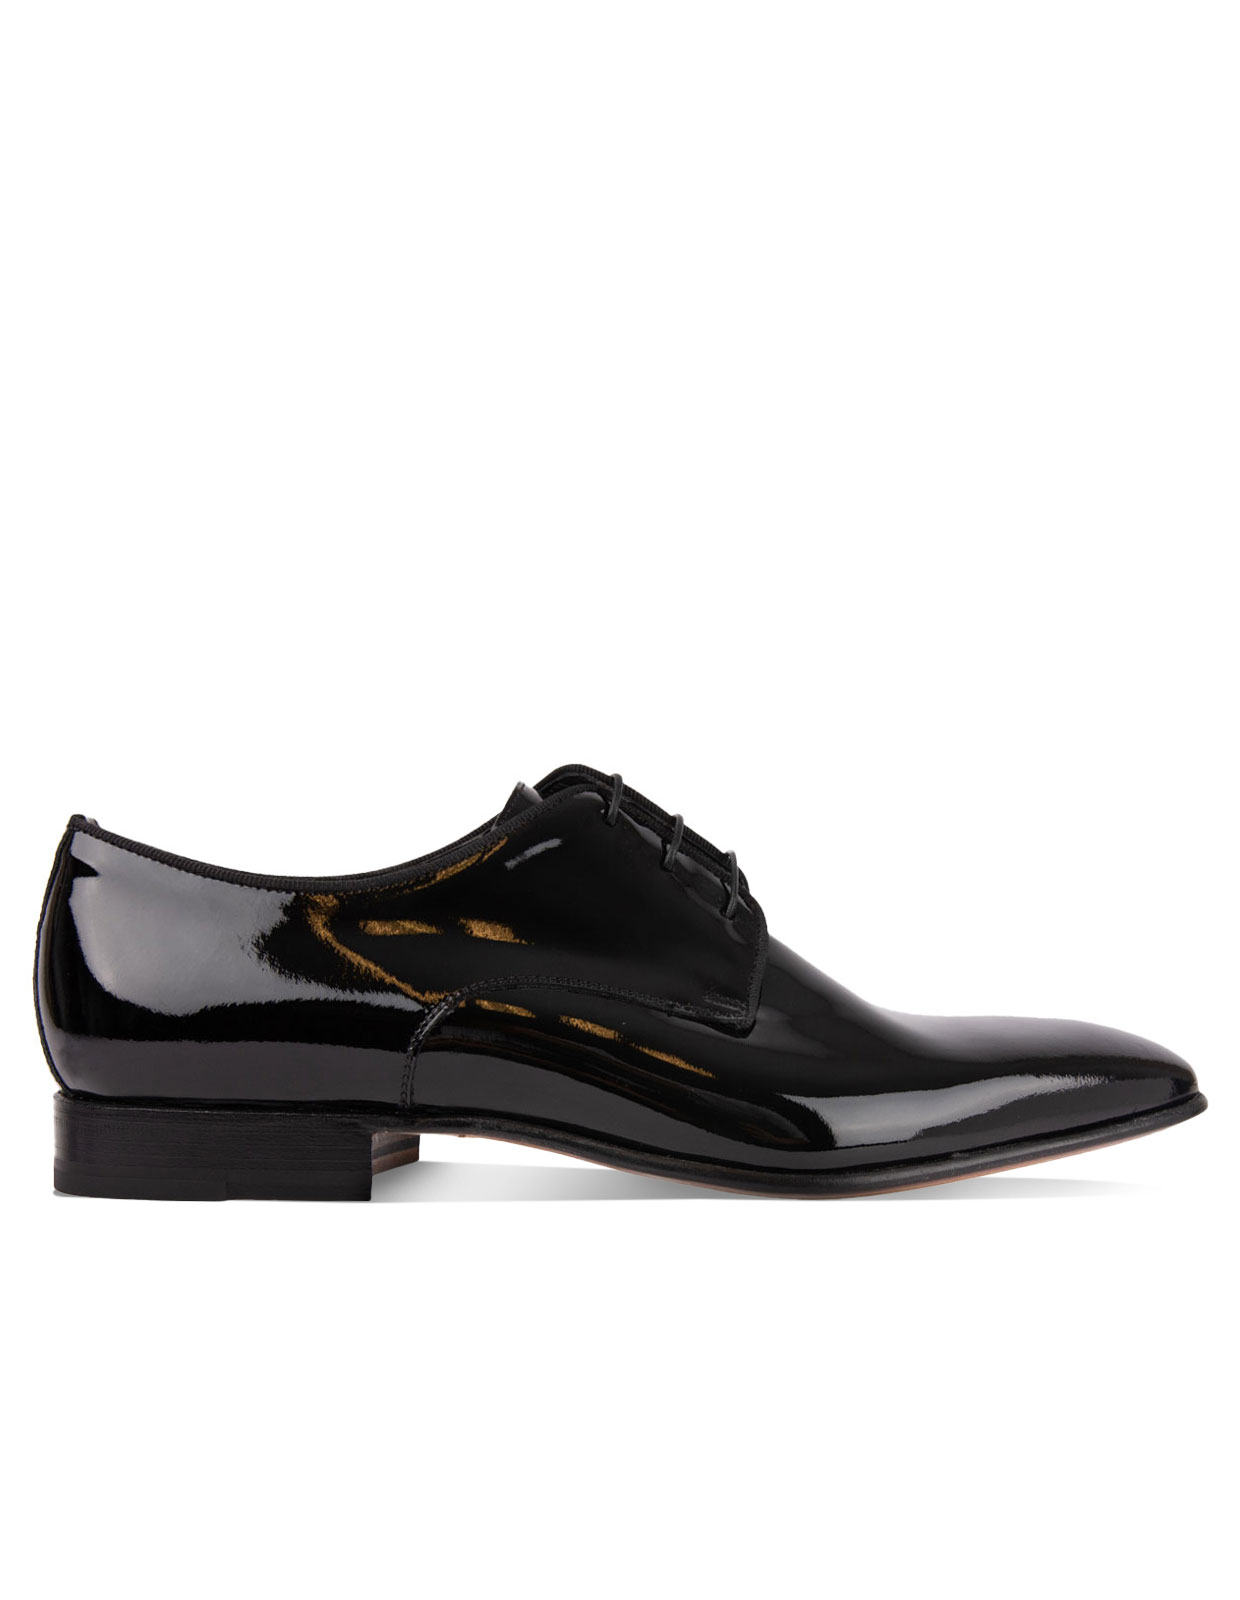 Lille Patent Leather Derby Shoes Black Stl 9.5